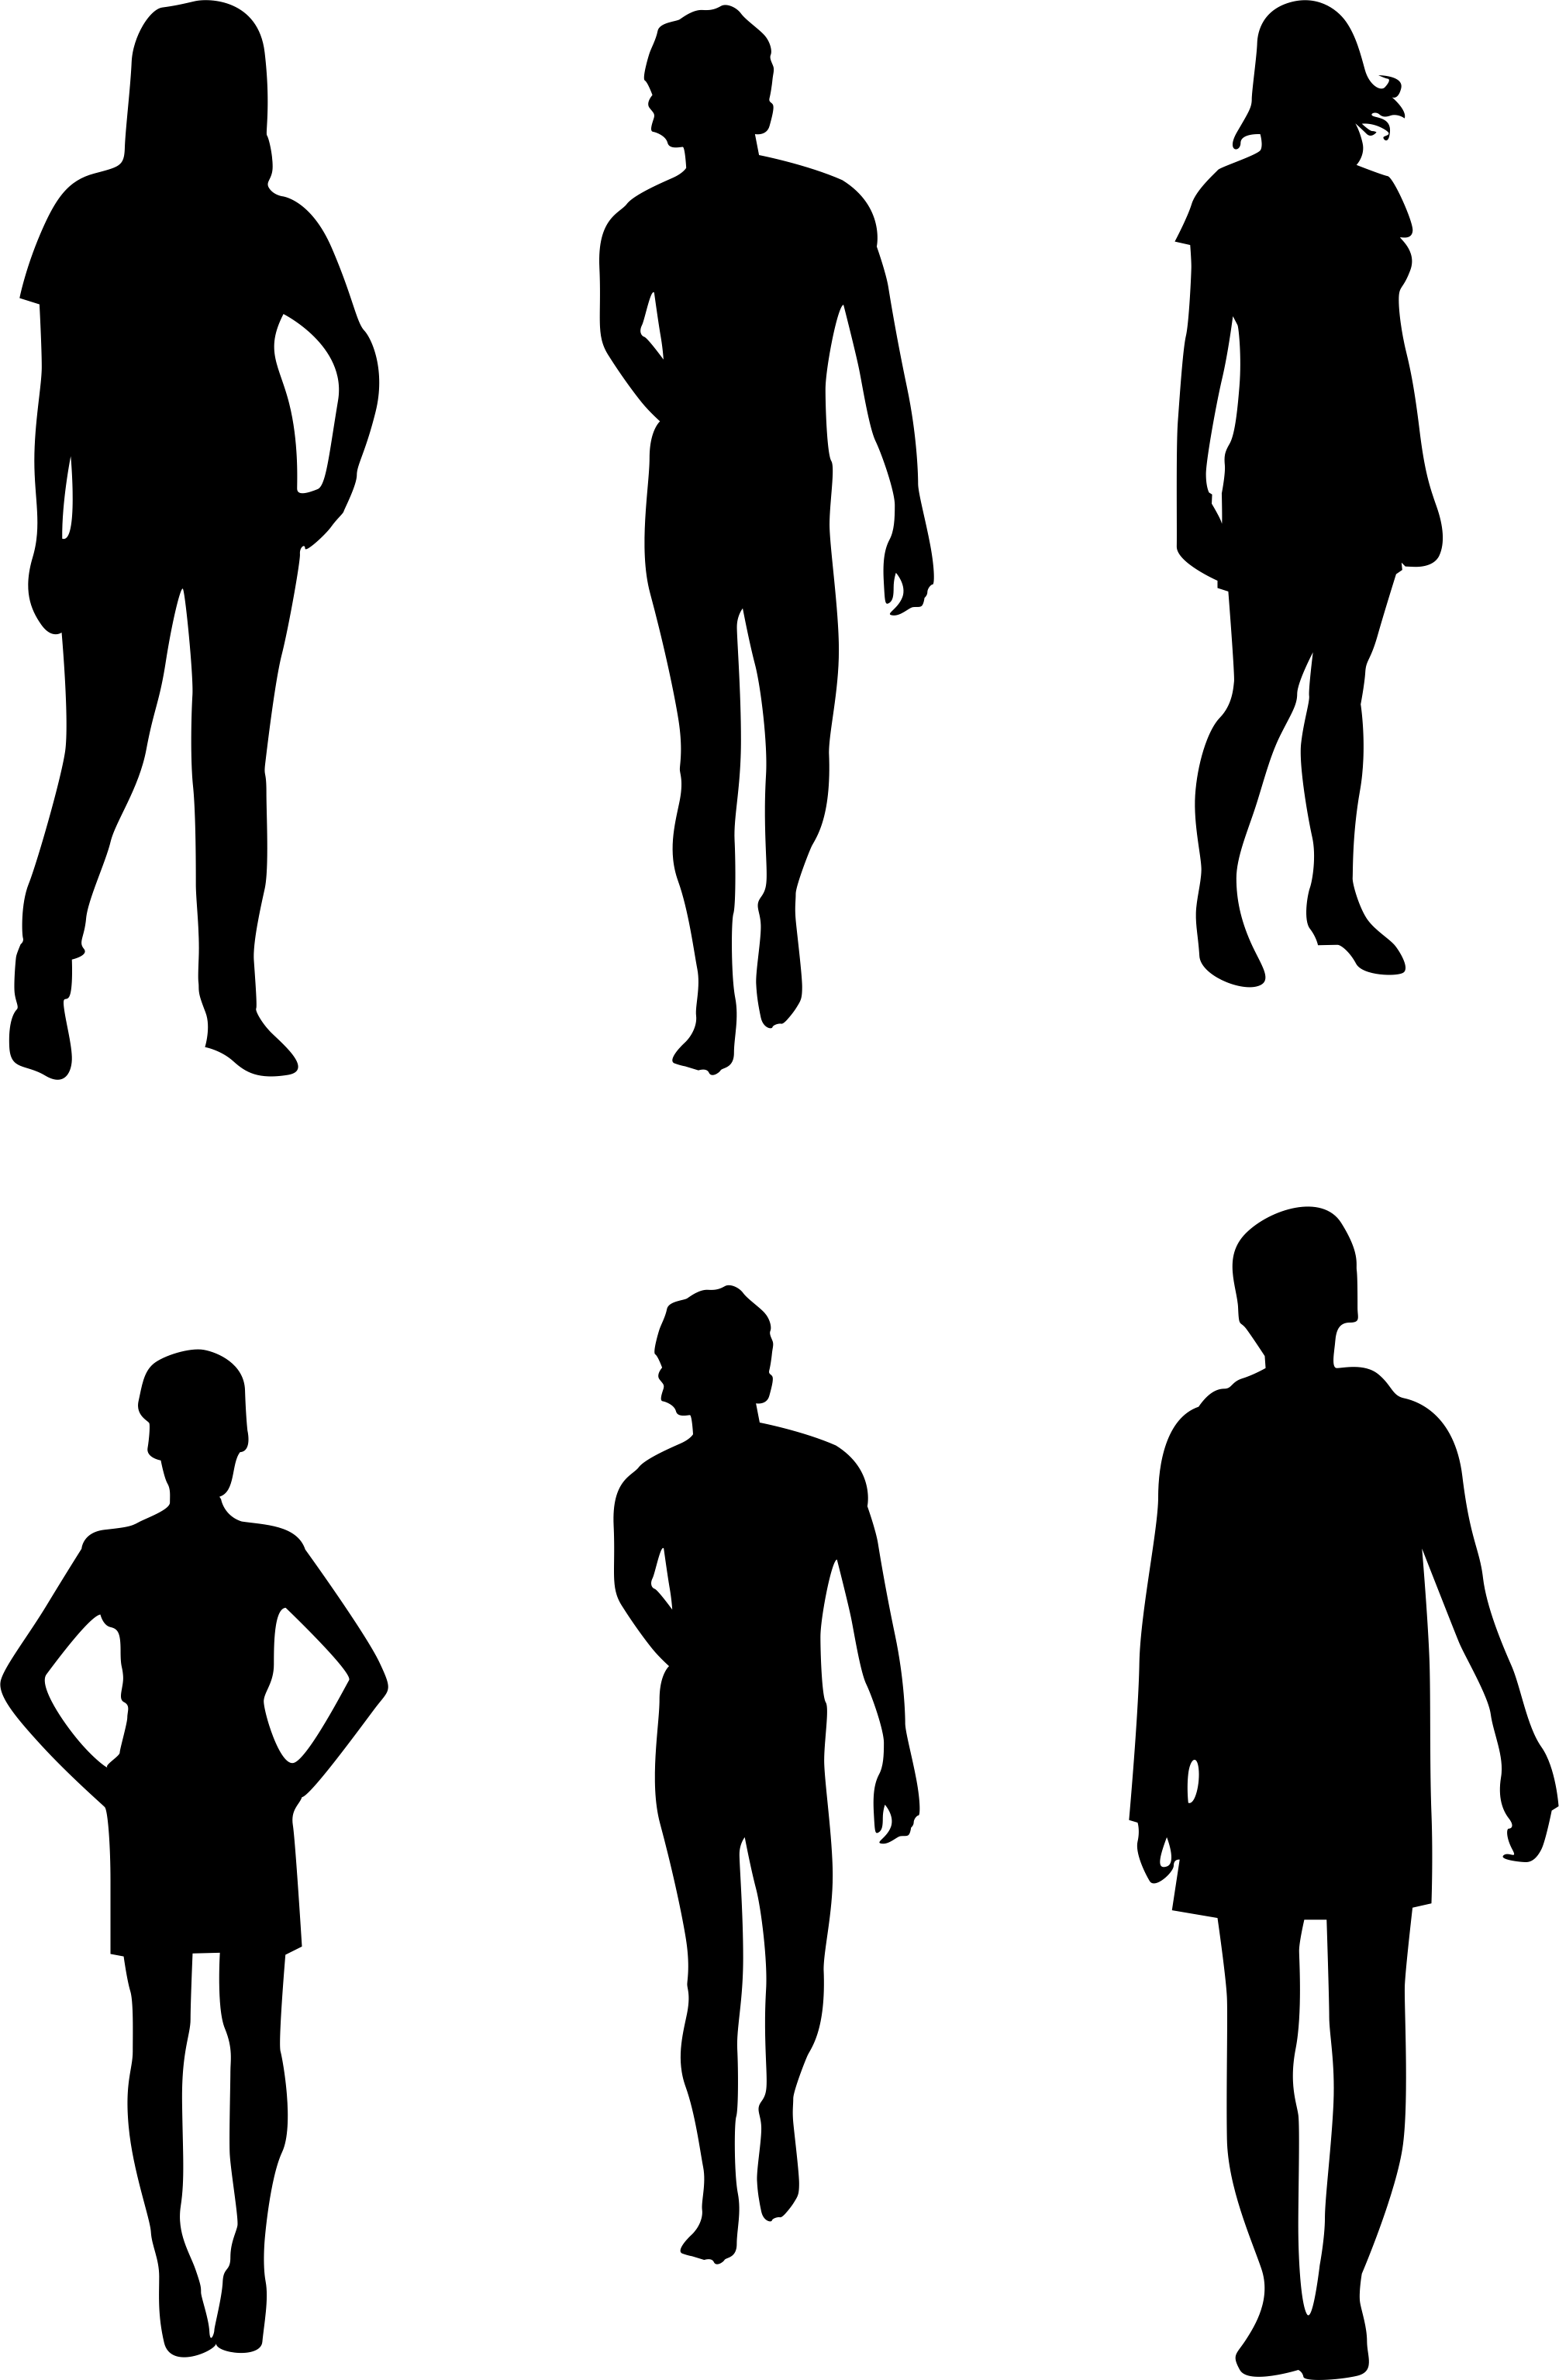 Party People Silhouette | Clipart library - Free Clipart Images